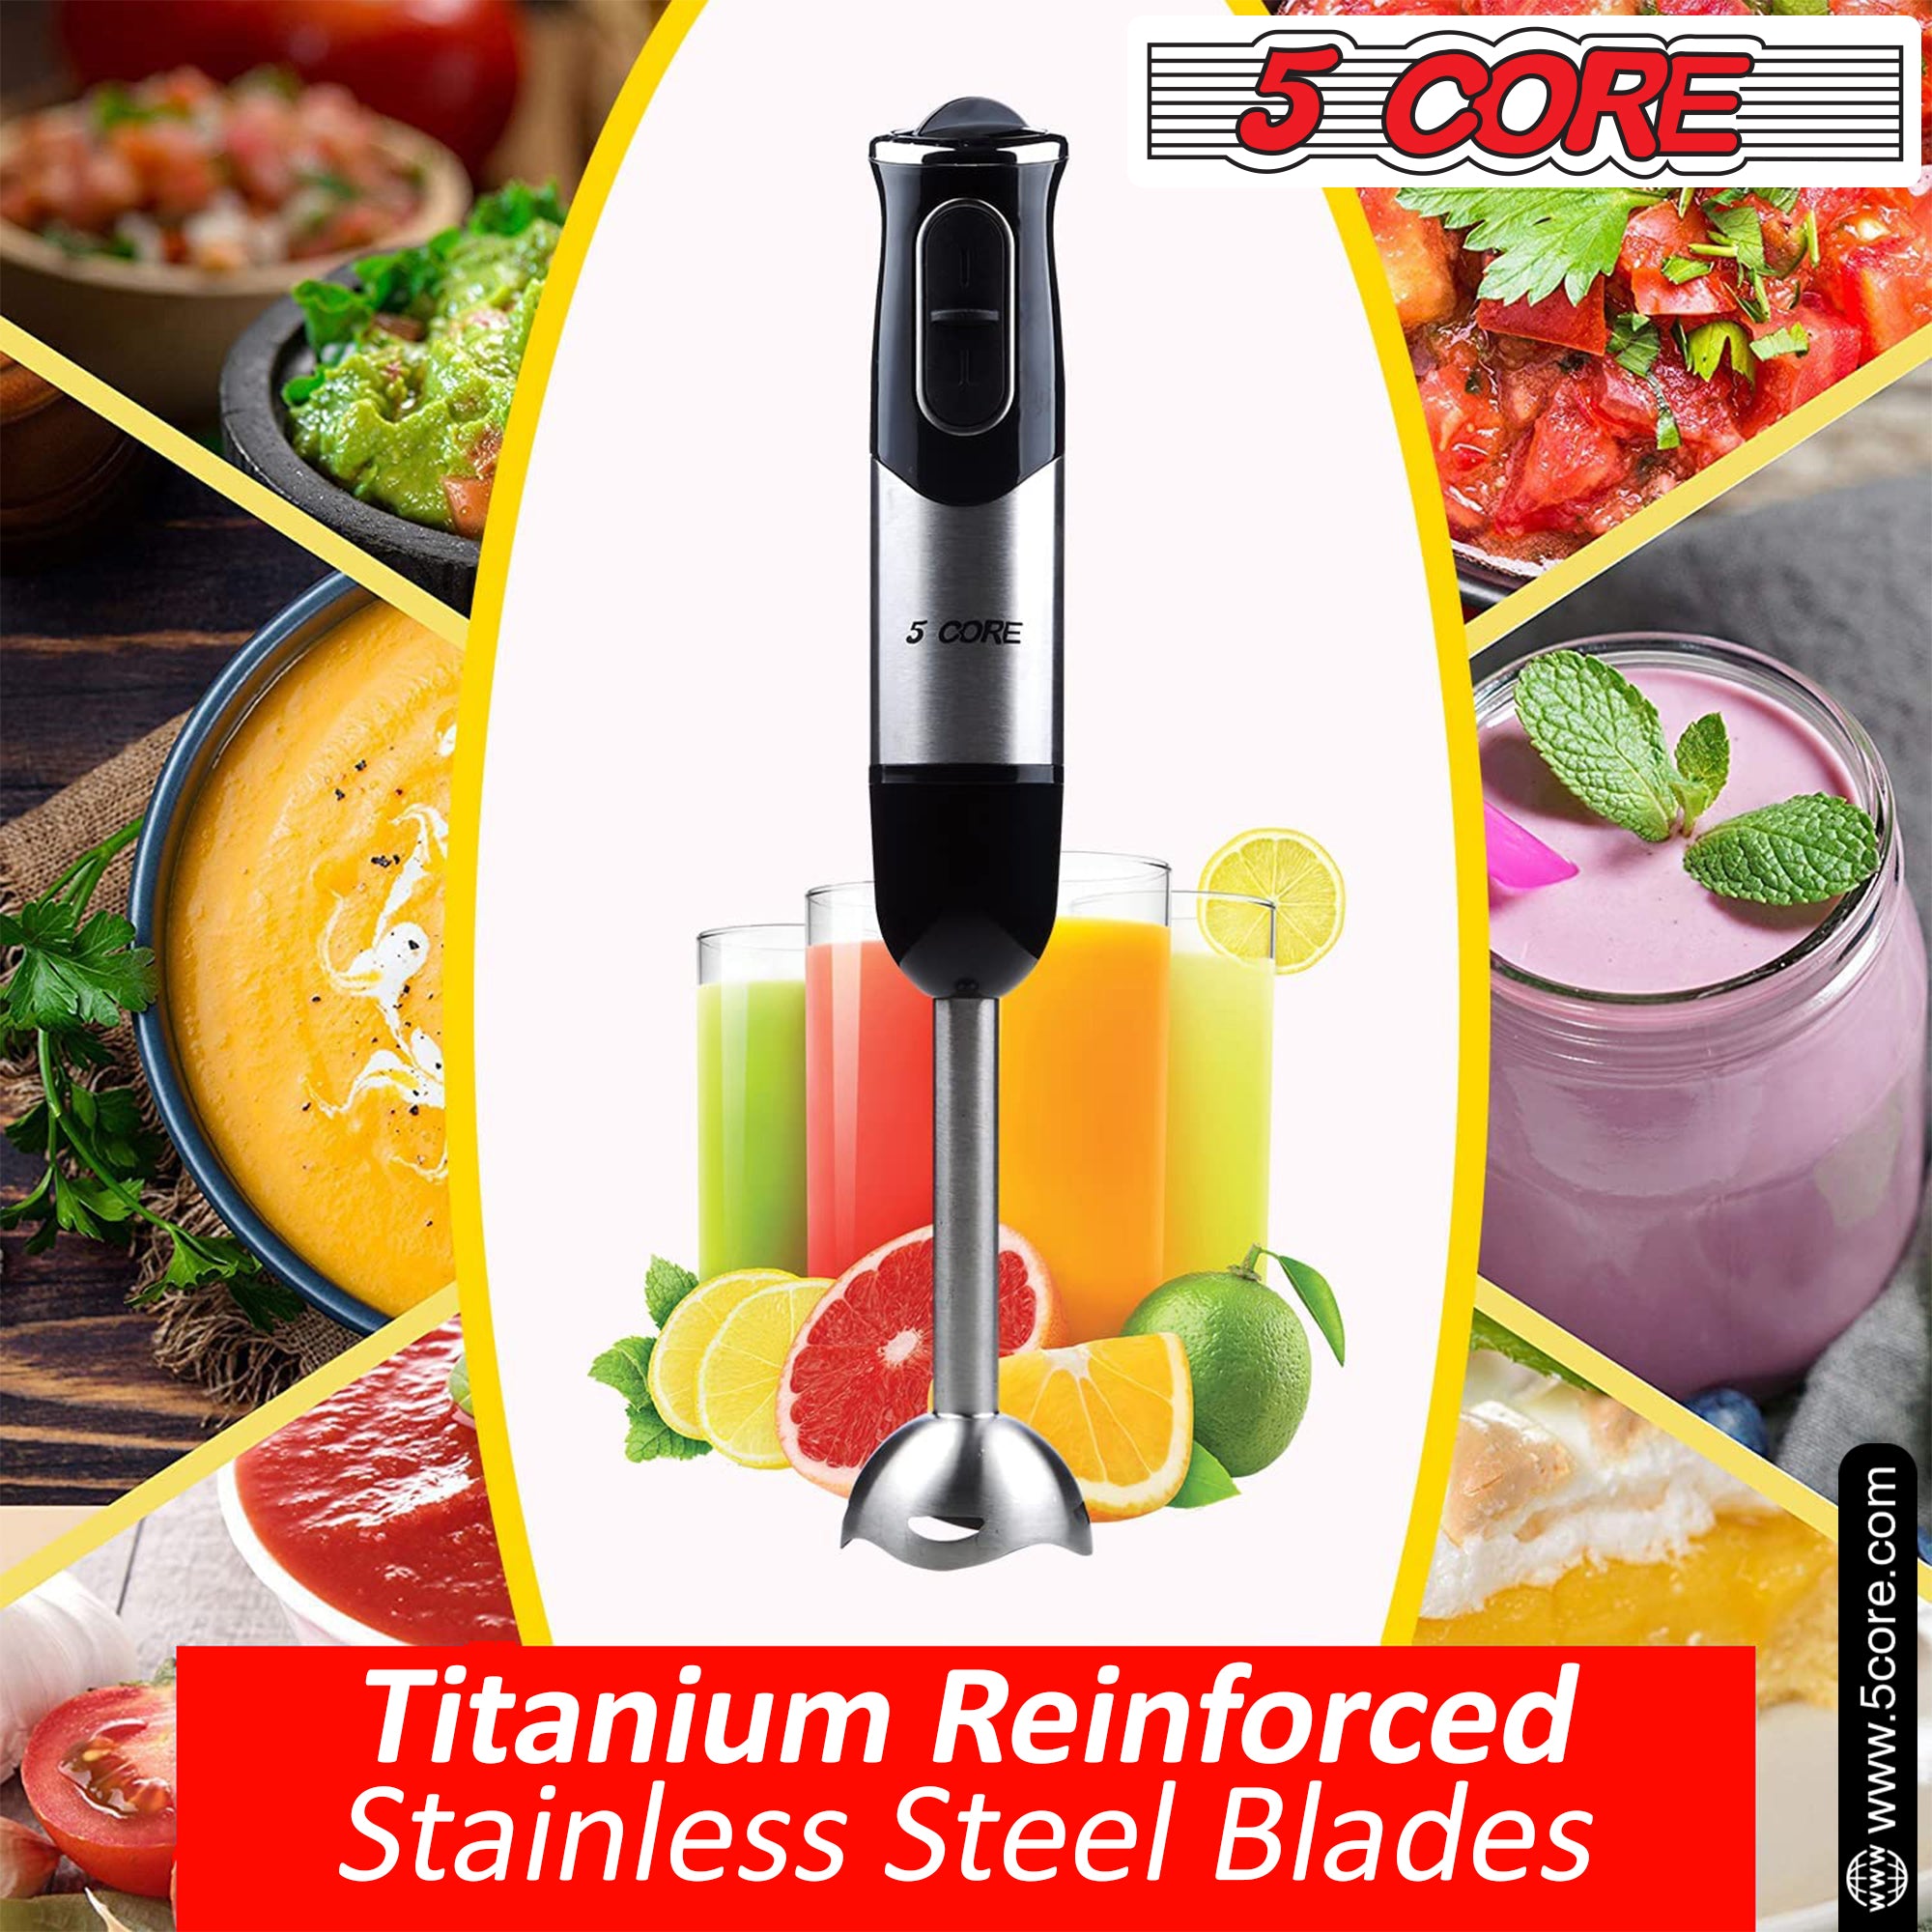 Electric Handheld Blender Buy Online at the Best Prince- 5 Core